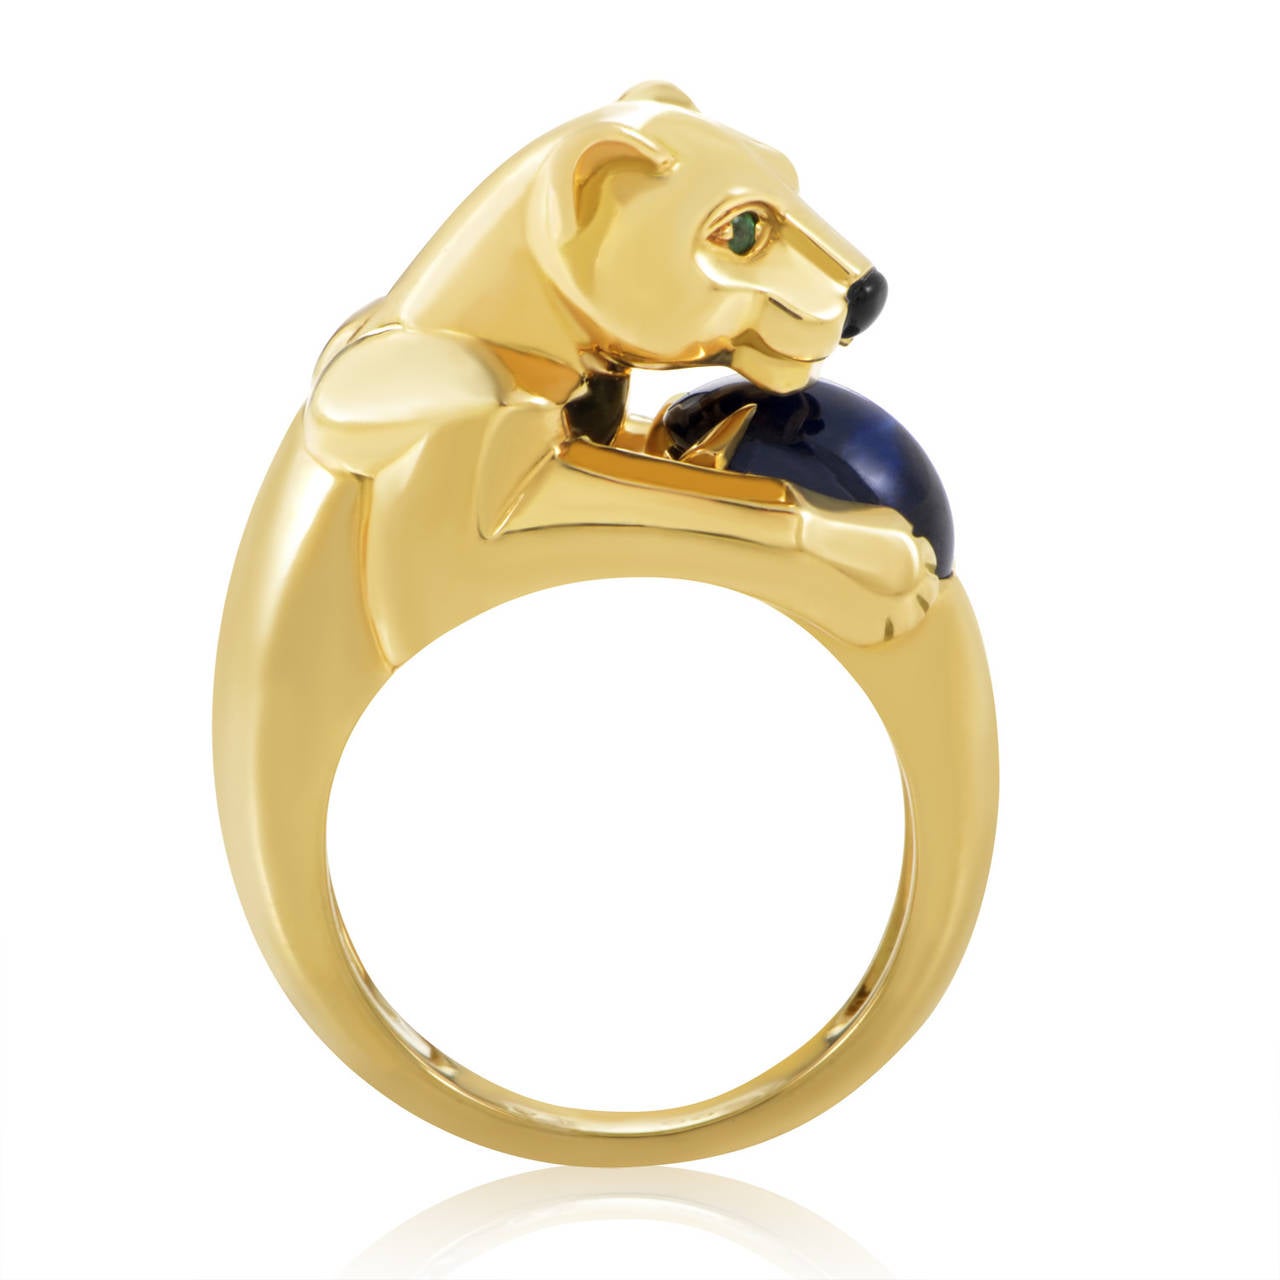 A brilliant blue sapphire is the hallmark of this dazzling creation from Cartier's Panthere collection. The ring is made of 18K yellow gold and boasts a panther-shaped motif with green emerald eyes, an onyx nose, and a sapphire stone clutched in its